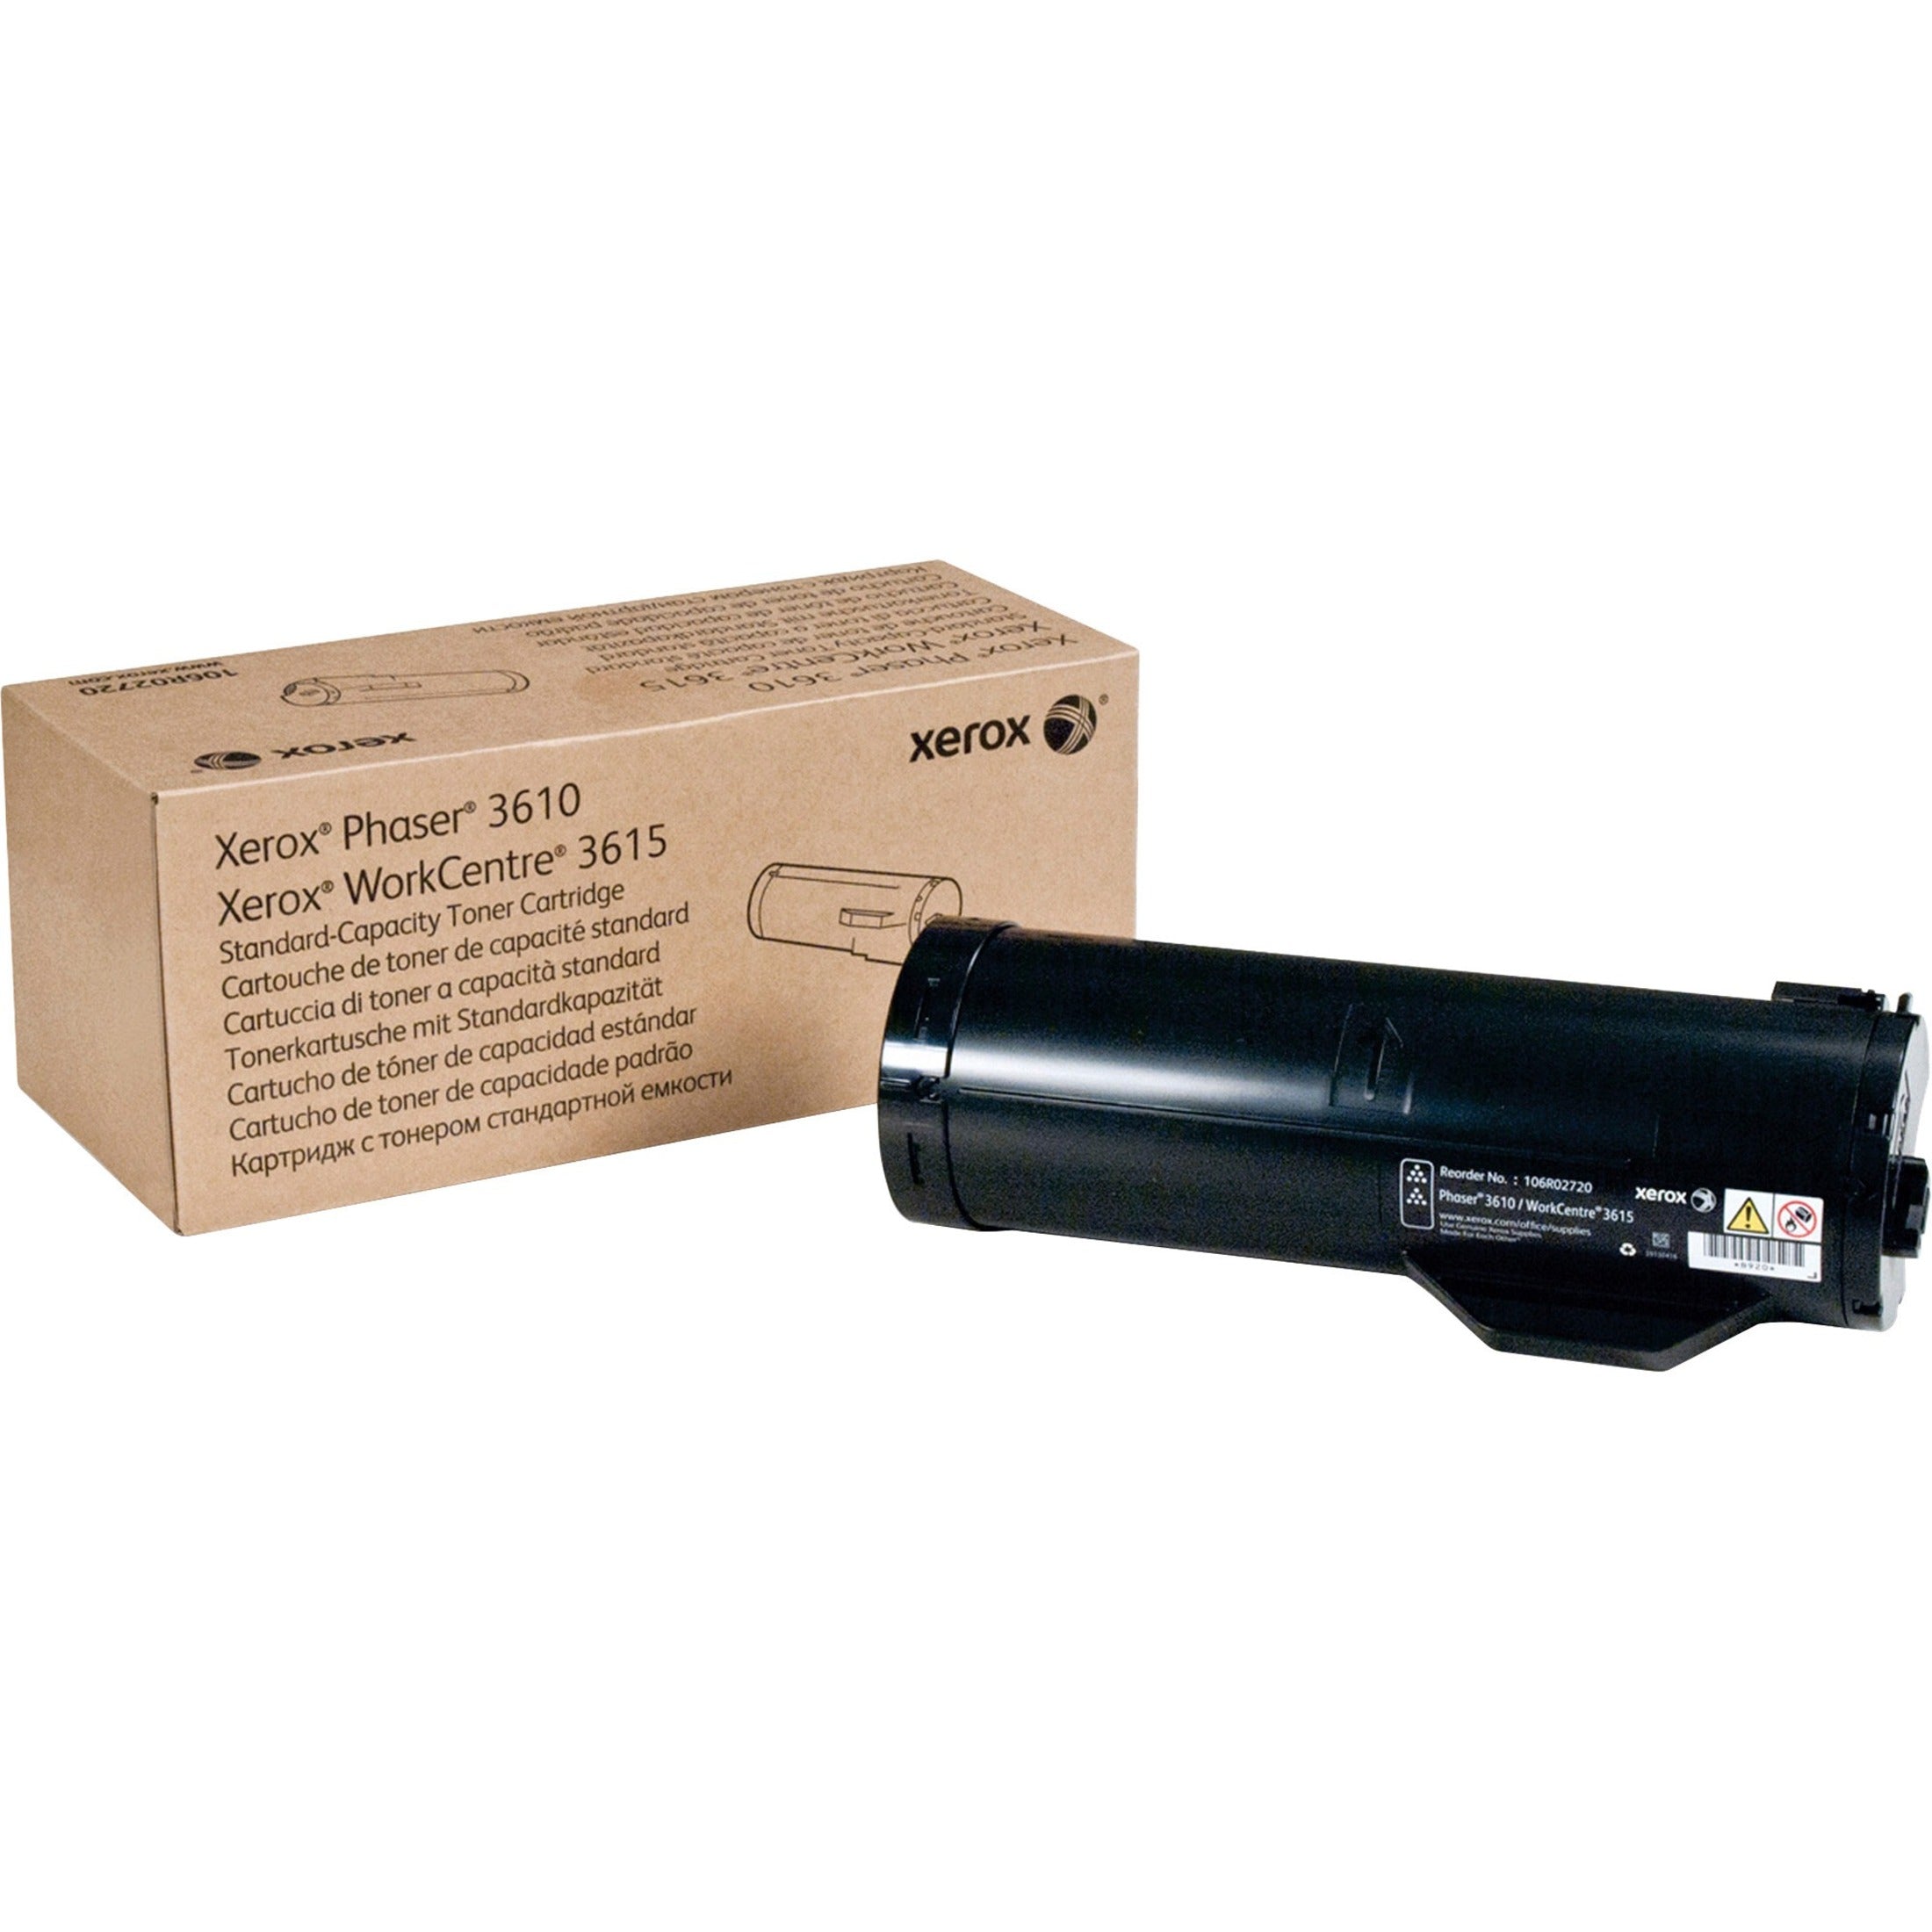 Xerox 106R02720 Phaser 3610/WorkCentre 3615 Standard Toner Cartridge, 5,900 Page Yield, Black